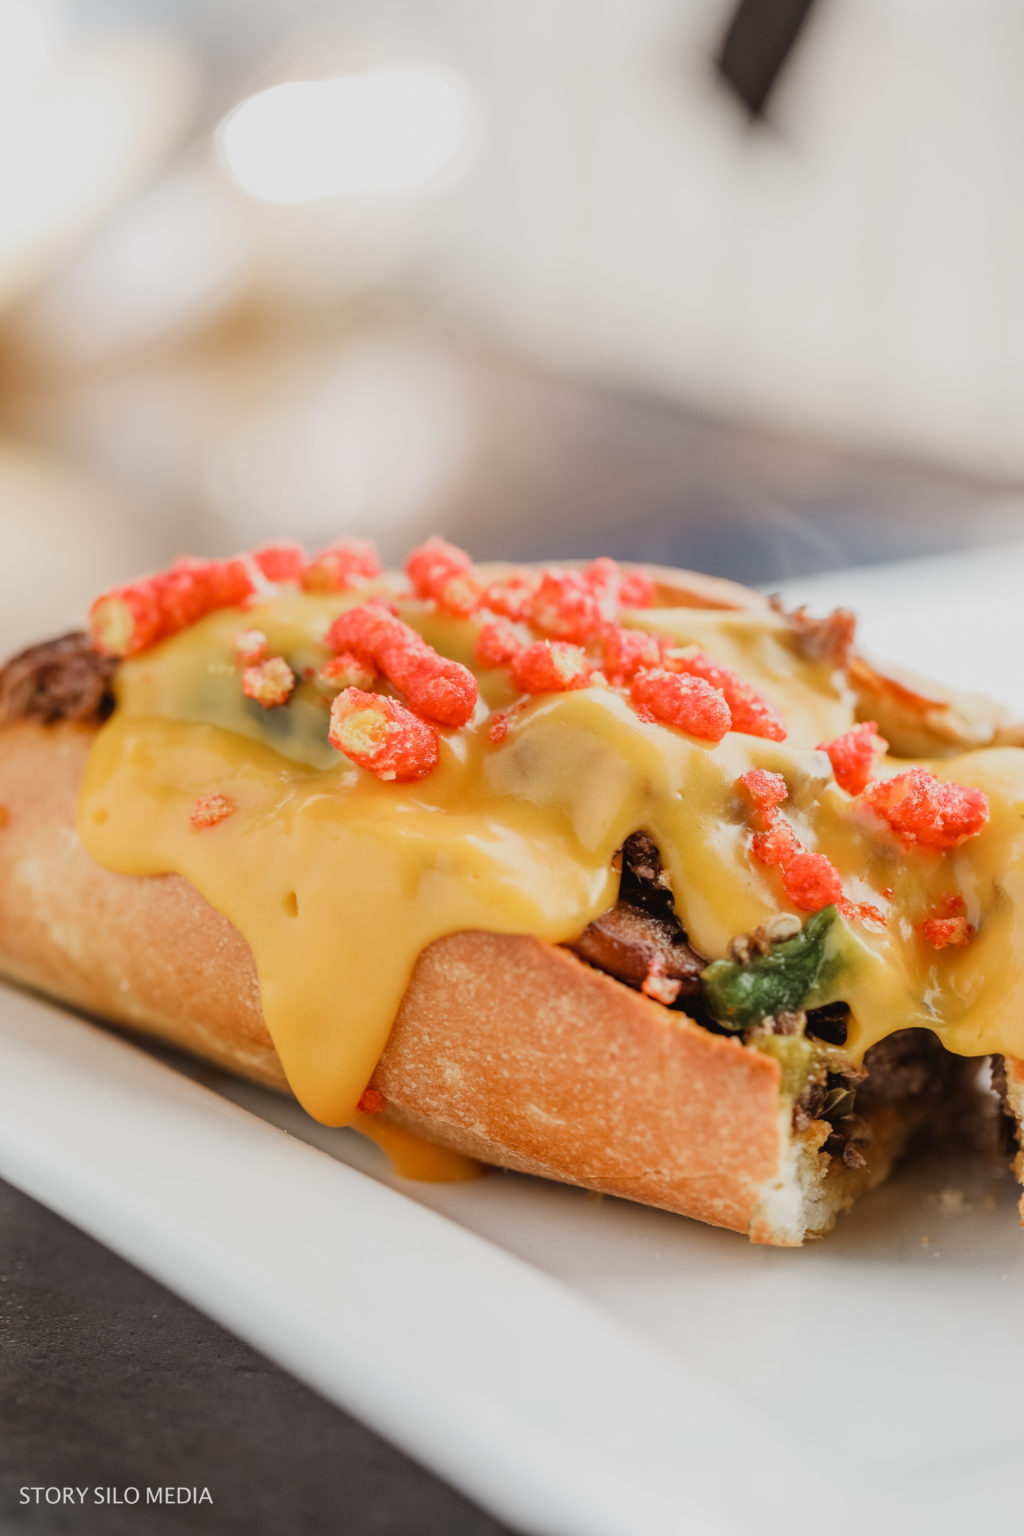 Image of a cheesesteak sandwich with cheese and Cheetos on it